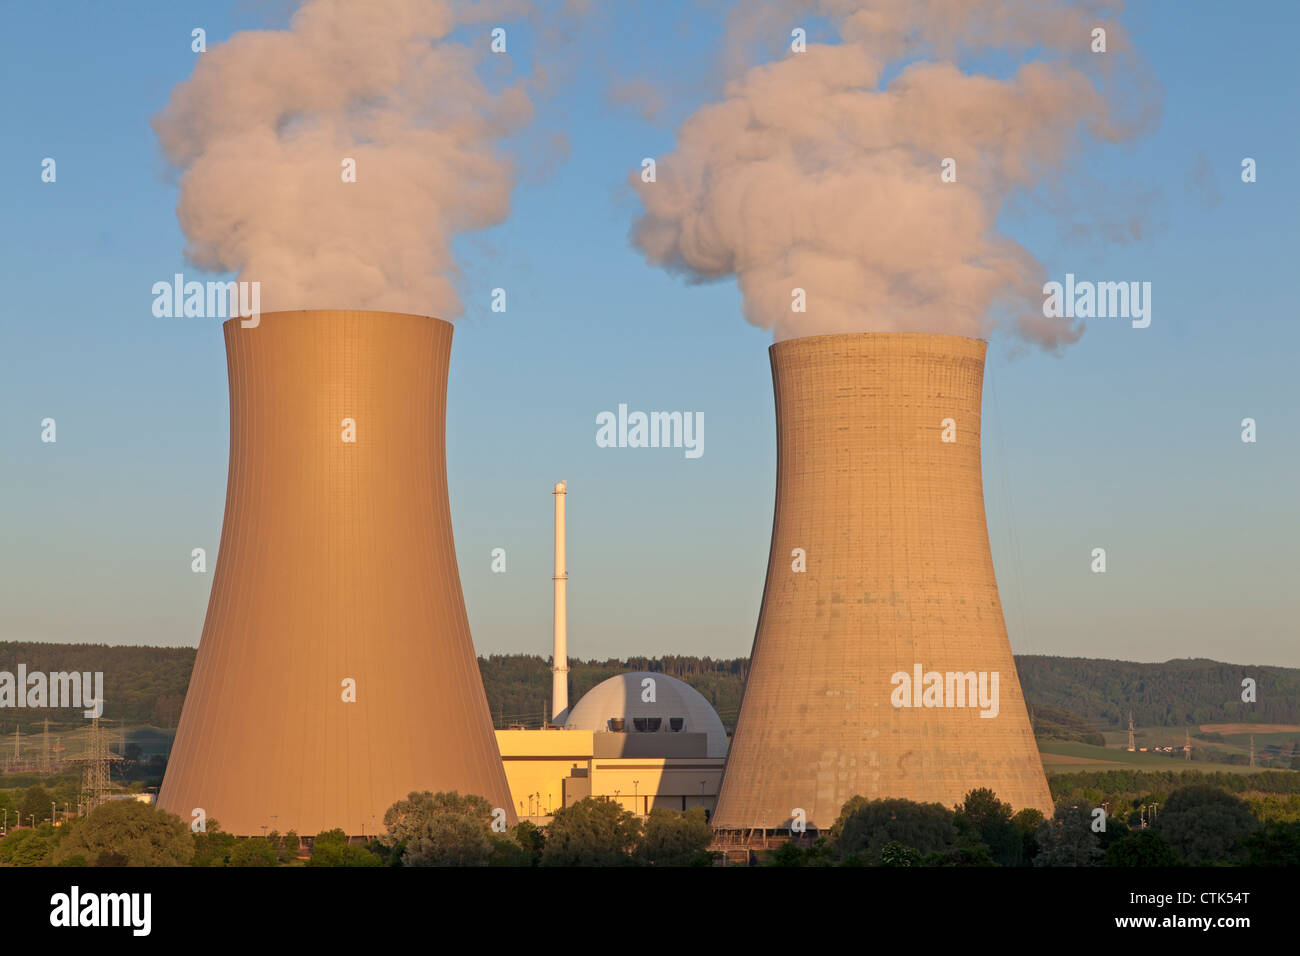 Nuclear power reactor, Germany Stock Photo